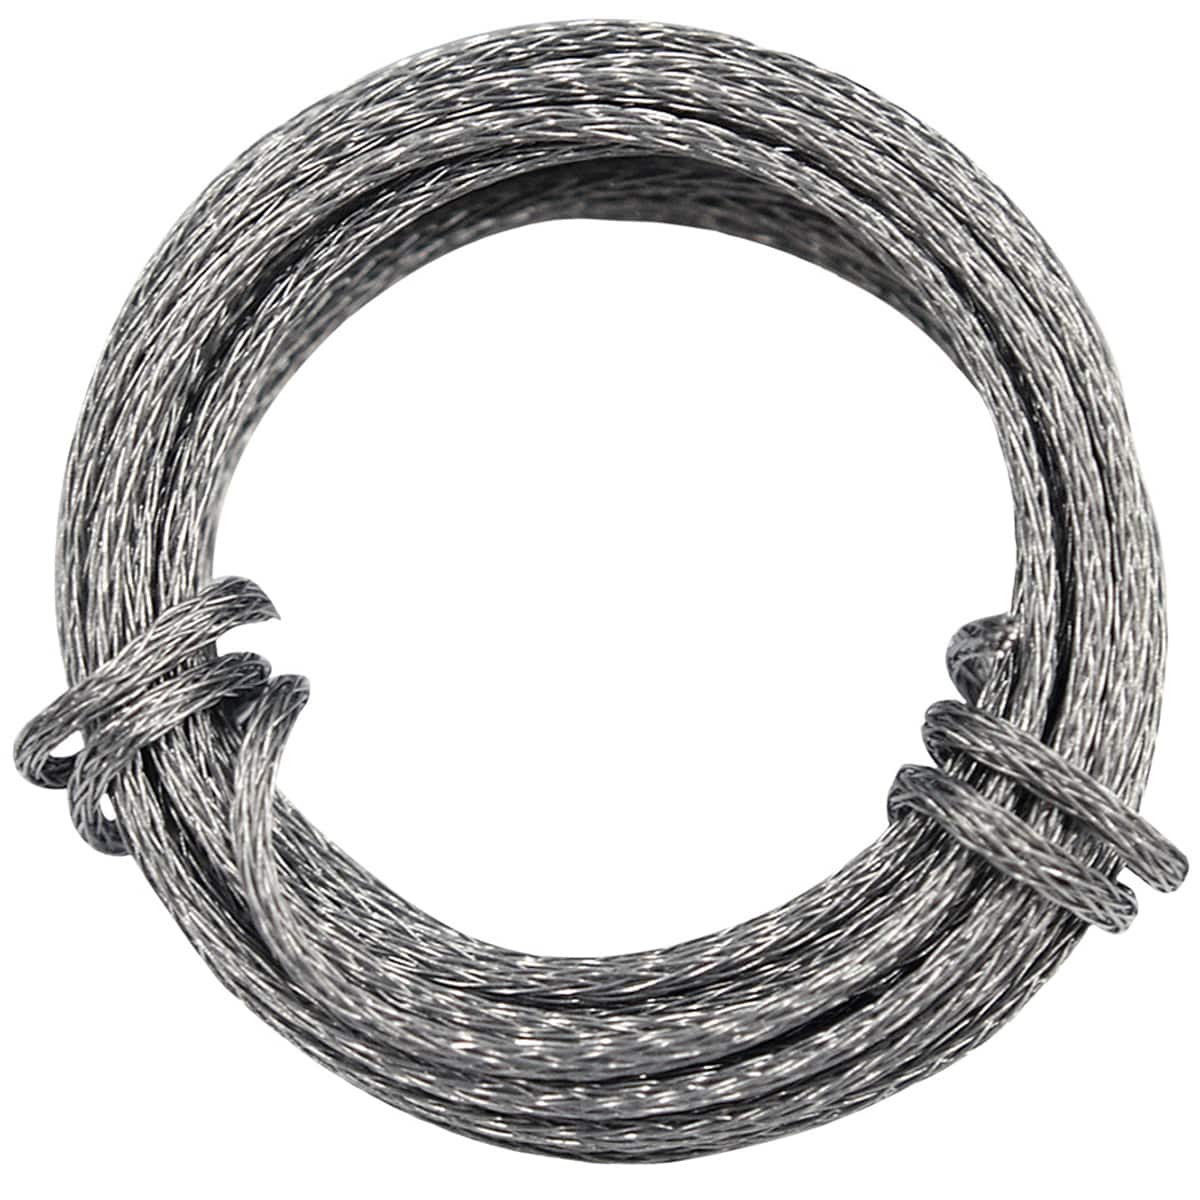 OOK 50122 Picture Hanging Wire, 9 ft L, Galvanized Steel, 20 lb